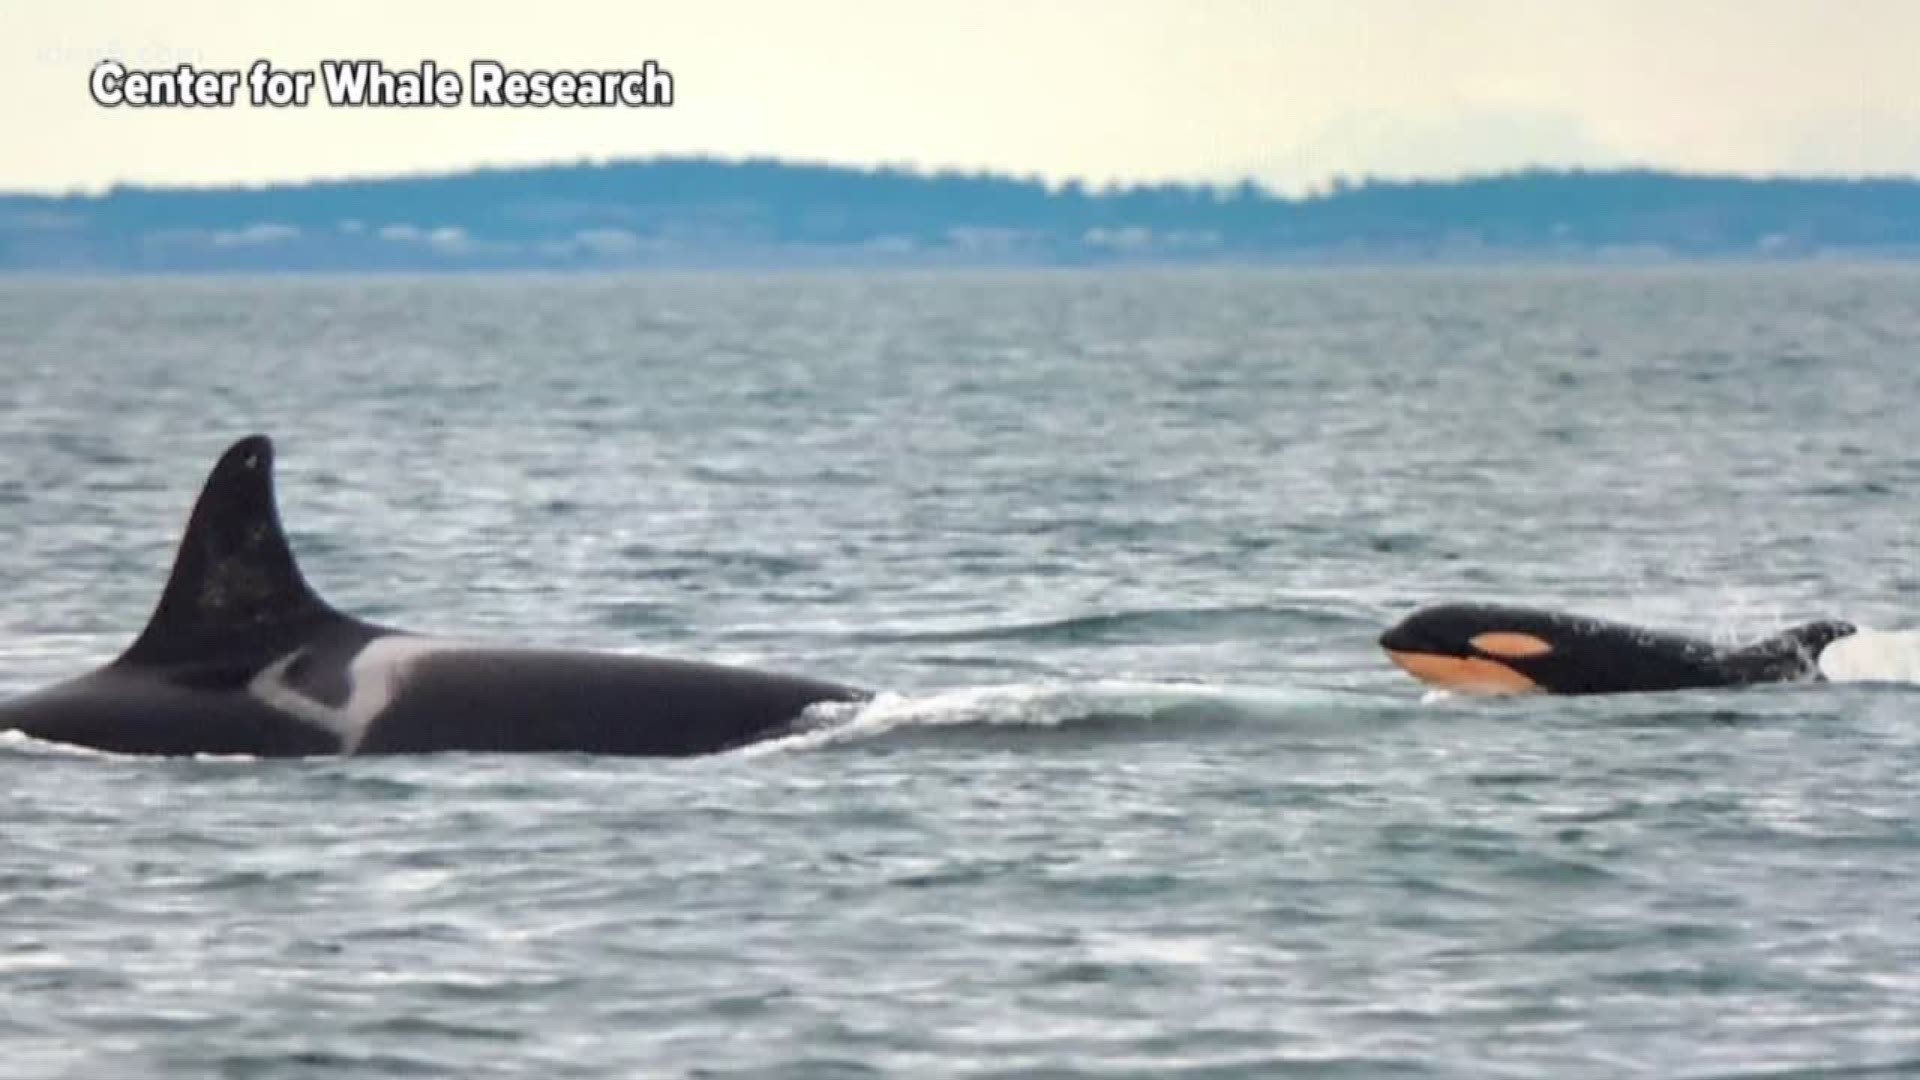 Orca advocates are celebrating the news that one of the recently born Southern Resident killer whale calves is a female.